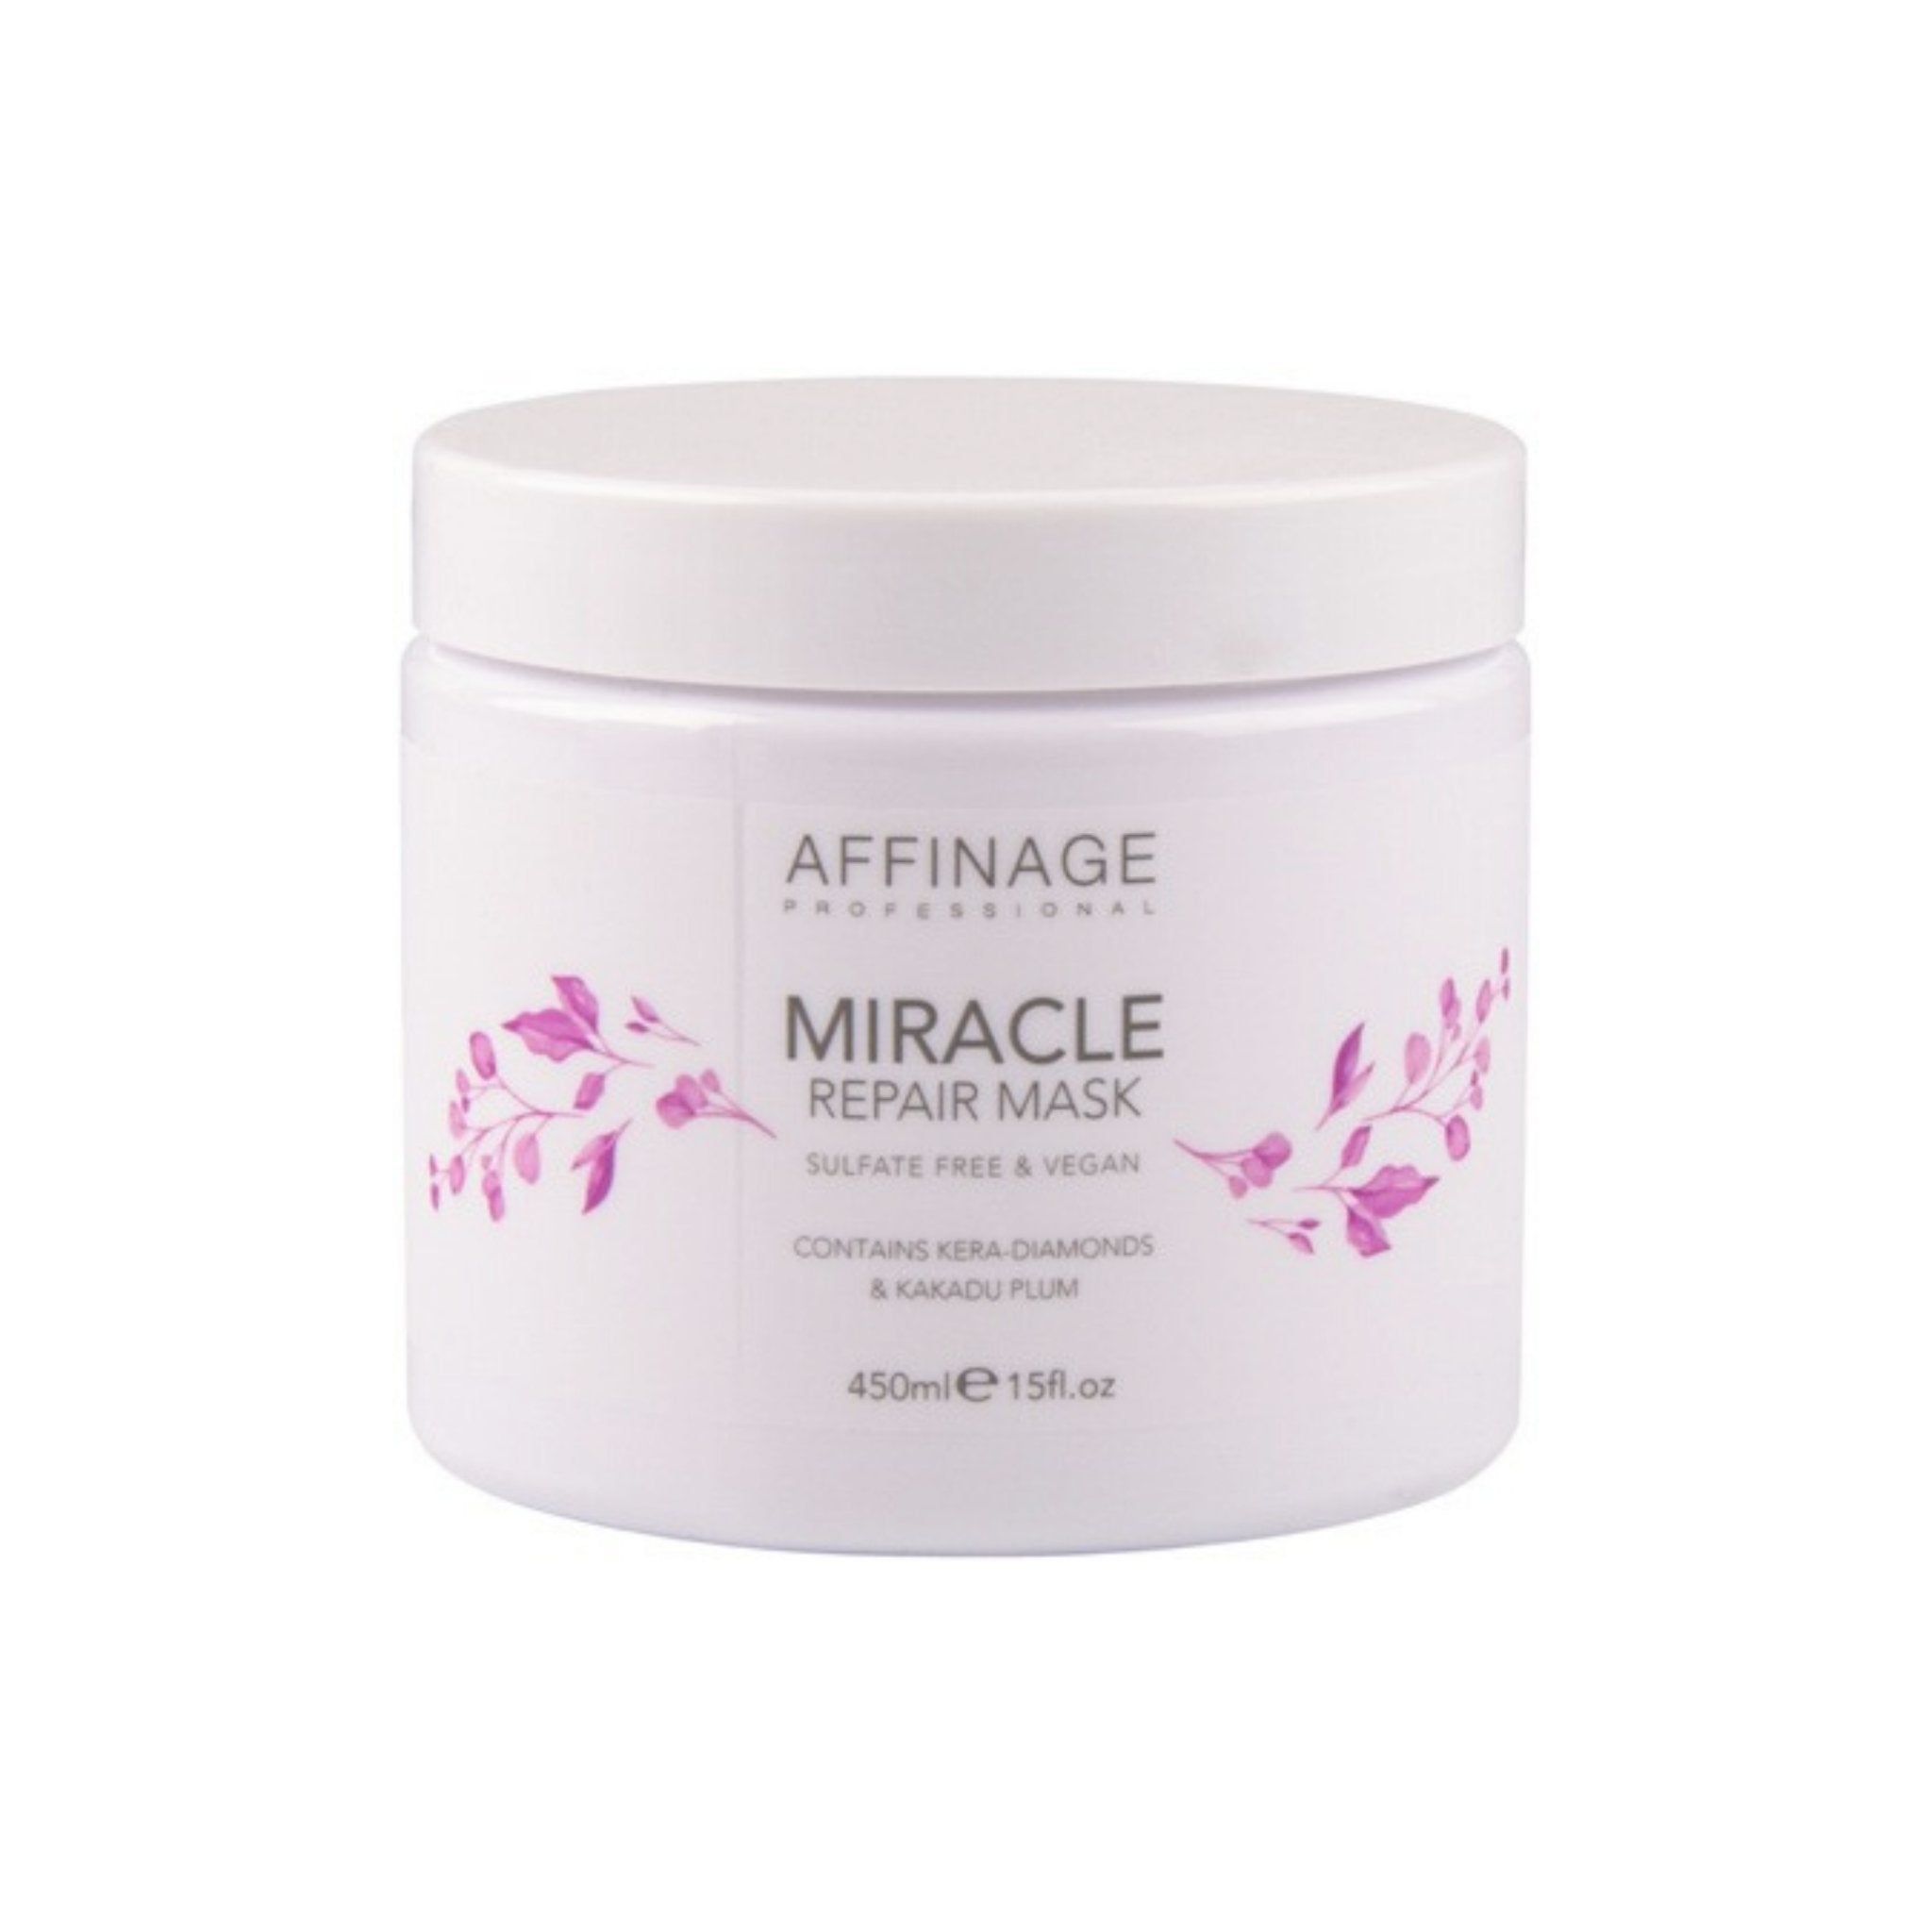 Affinage Cleanse & Care Miracle Repair Mask 450ml - HairBeautyInk